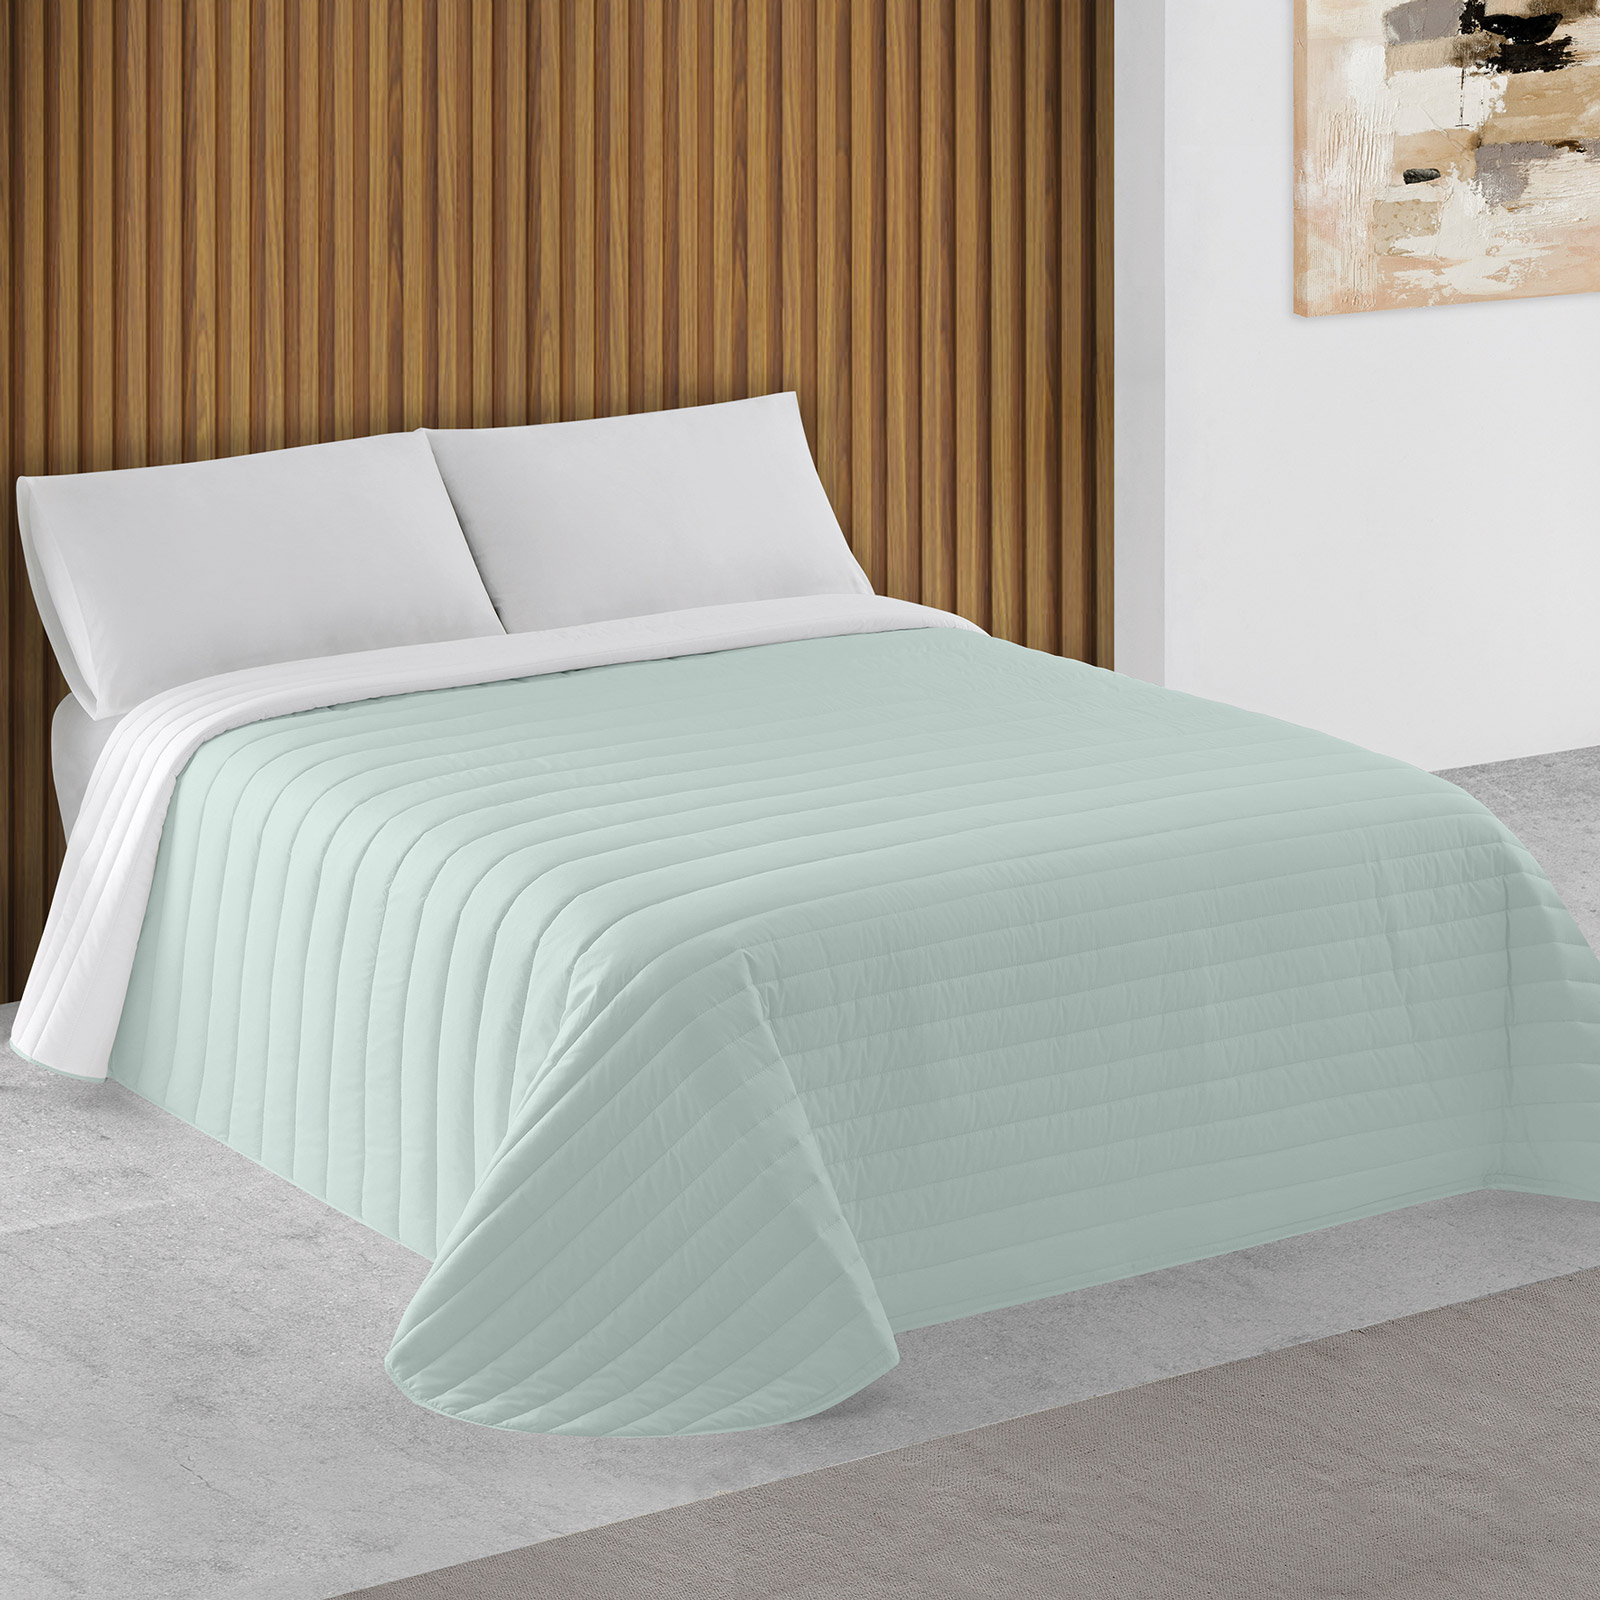 Two-tone Bouti bedspread light green and white